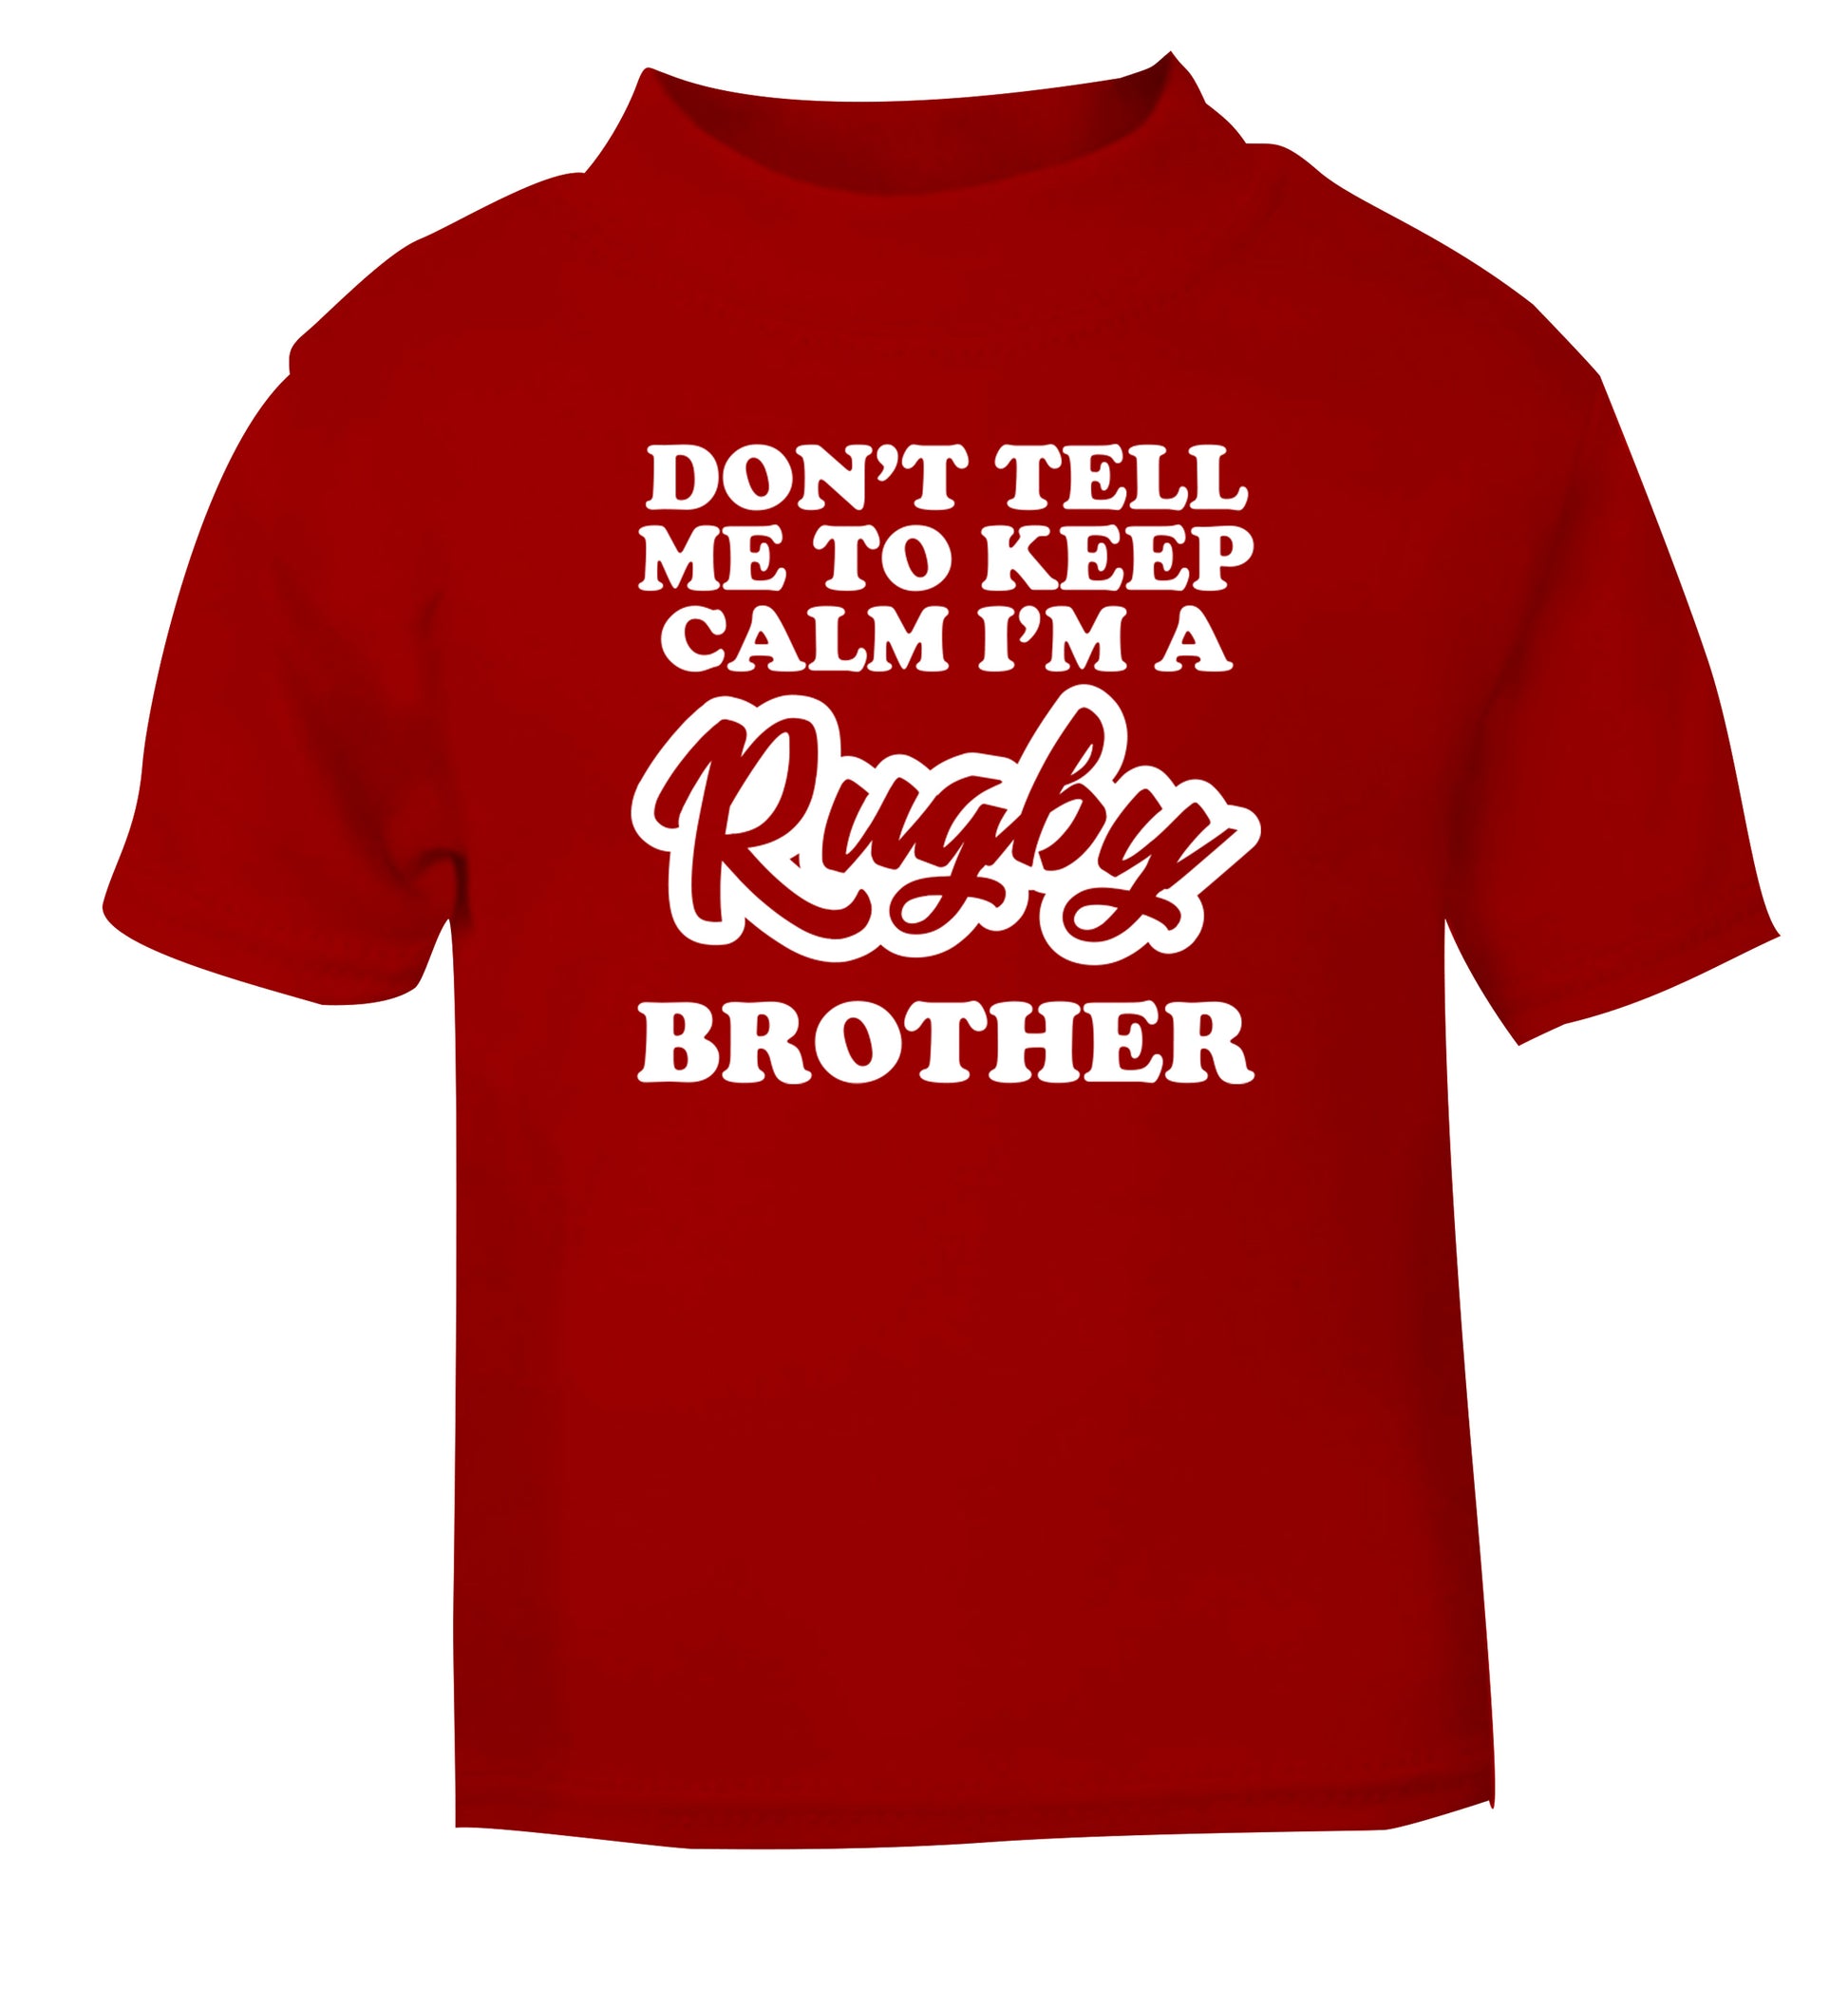 Don't tell me keep calm I'm a rugby brother red Baby Toddler Tshirt 2 Years